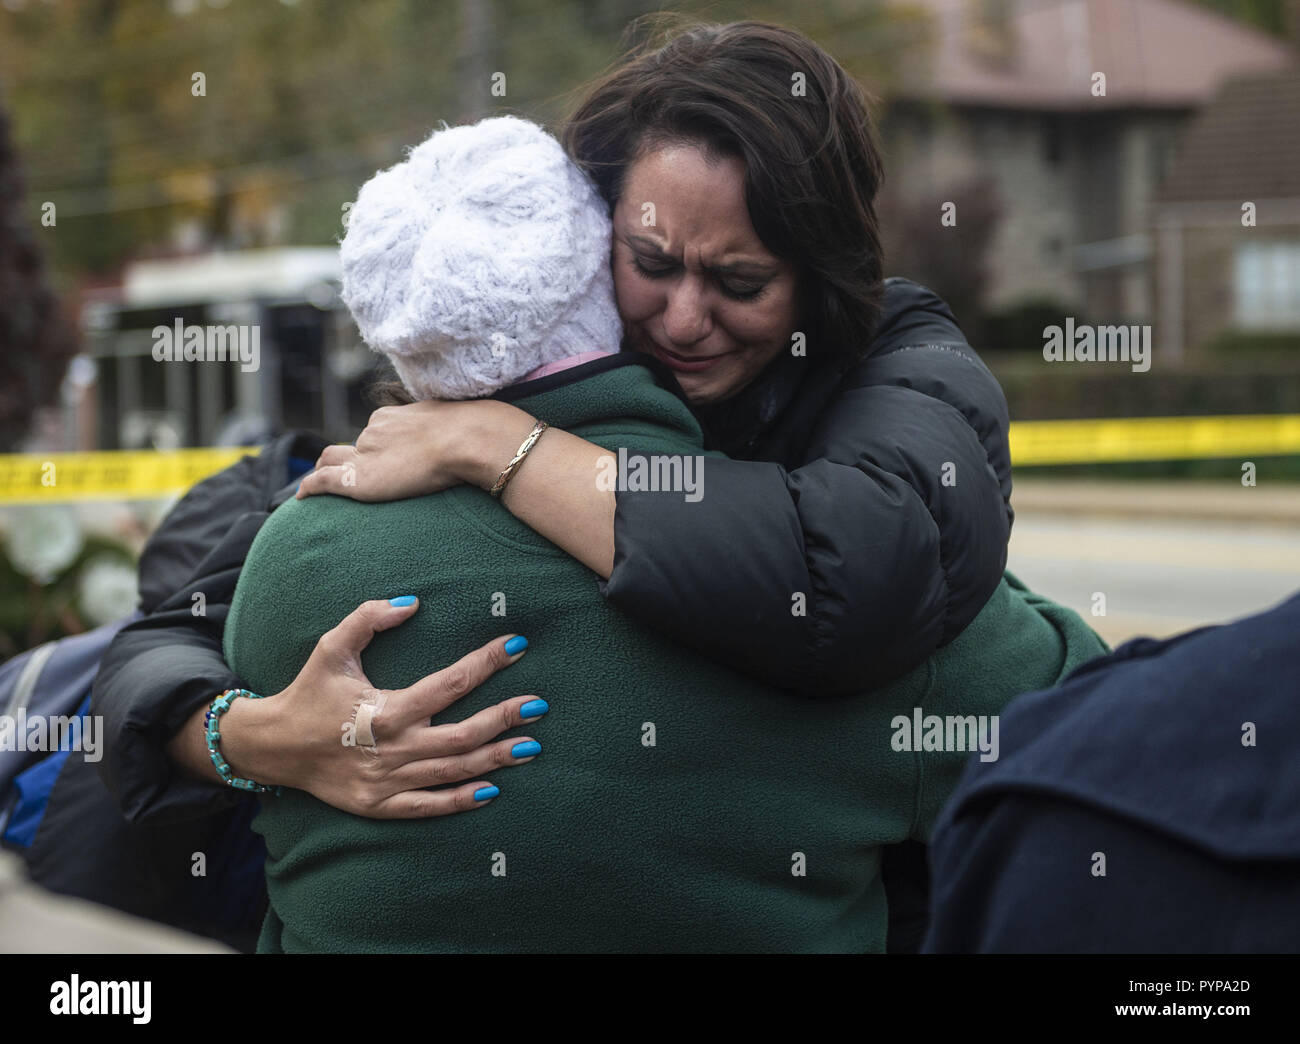 Pittsburgh, Pennsylvania, USA. 29th Oct, 2018. Community members comfort each other during an impromptu memorial service for the victims of the Tree of Life Massacre. Members of Pittsburgh and the Squirrel Hill community pay their respects at the memorial to the 11 victims of the Tree of Life Synagogue massacre perpetrated by suspect Robert Bowers on Saturday, October 27. Credit: Matthew Hatcher/SOPA Images/ZUMA Wire/Alamy Live News Stock Photo